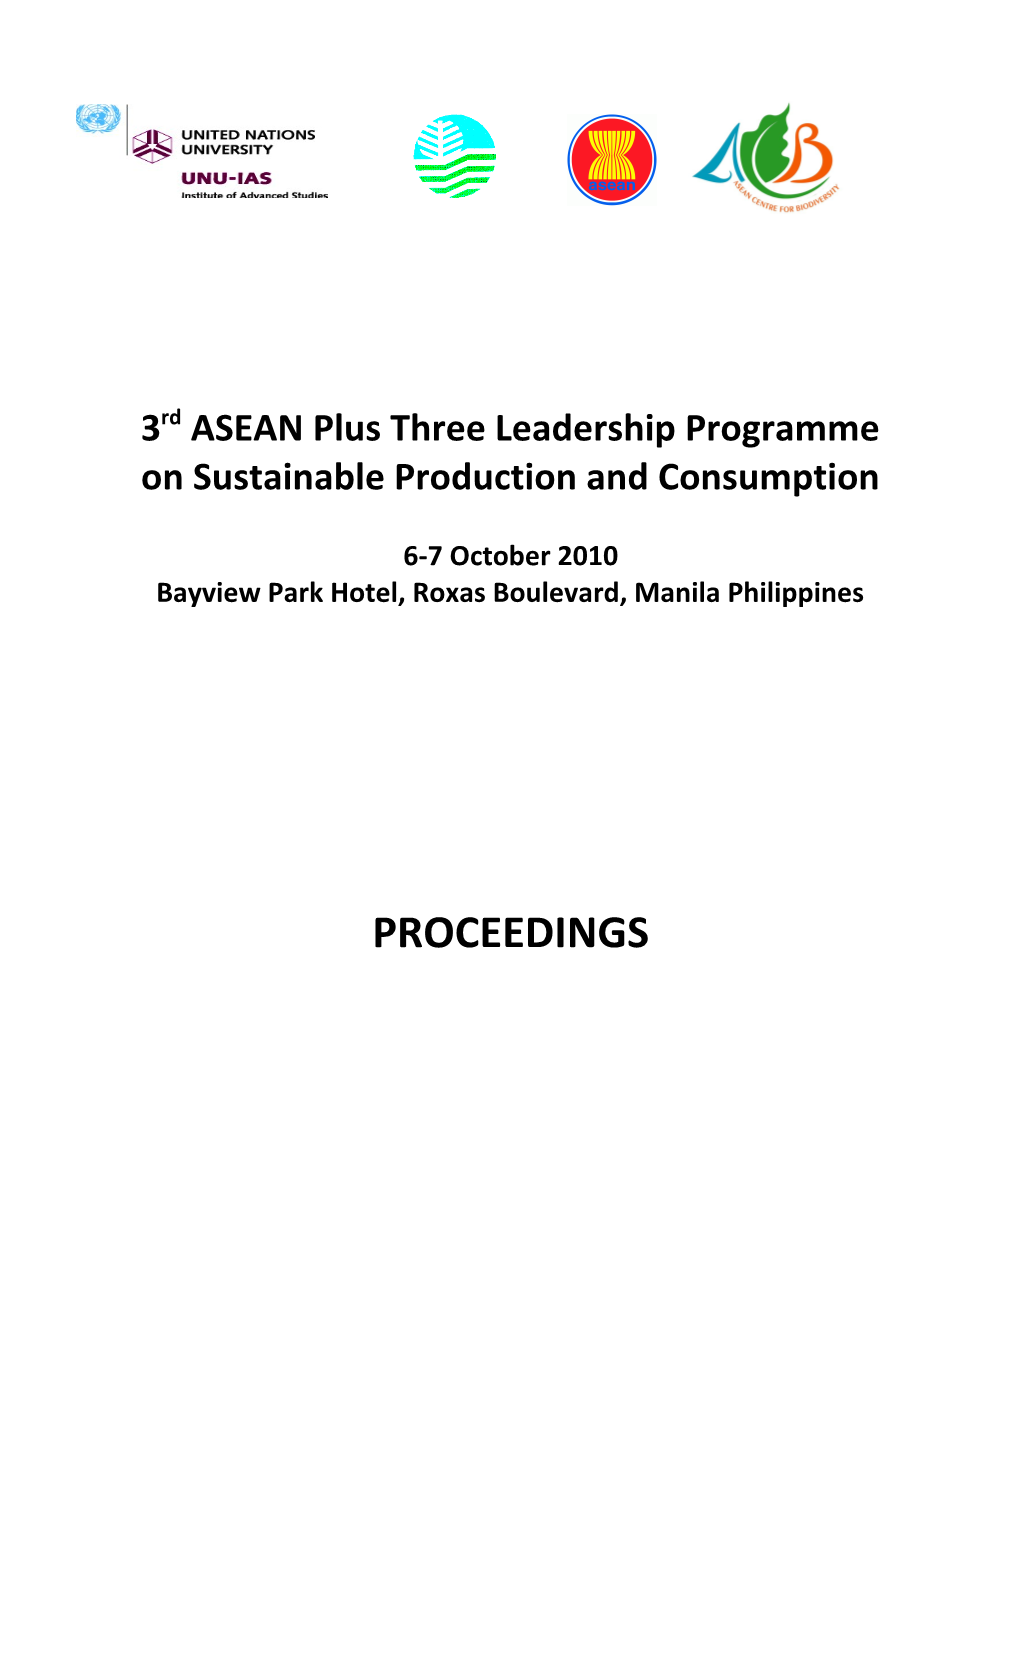 3Rd ASEAN Plus Three Leadership Programme on Sustainable Production and Consumption